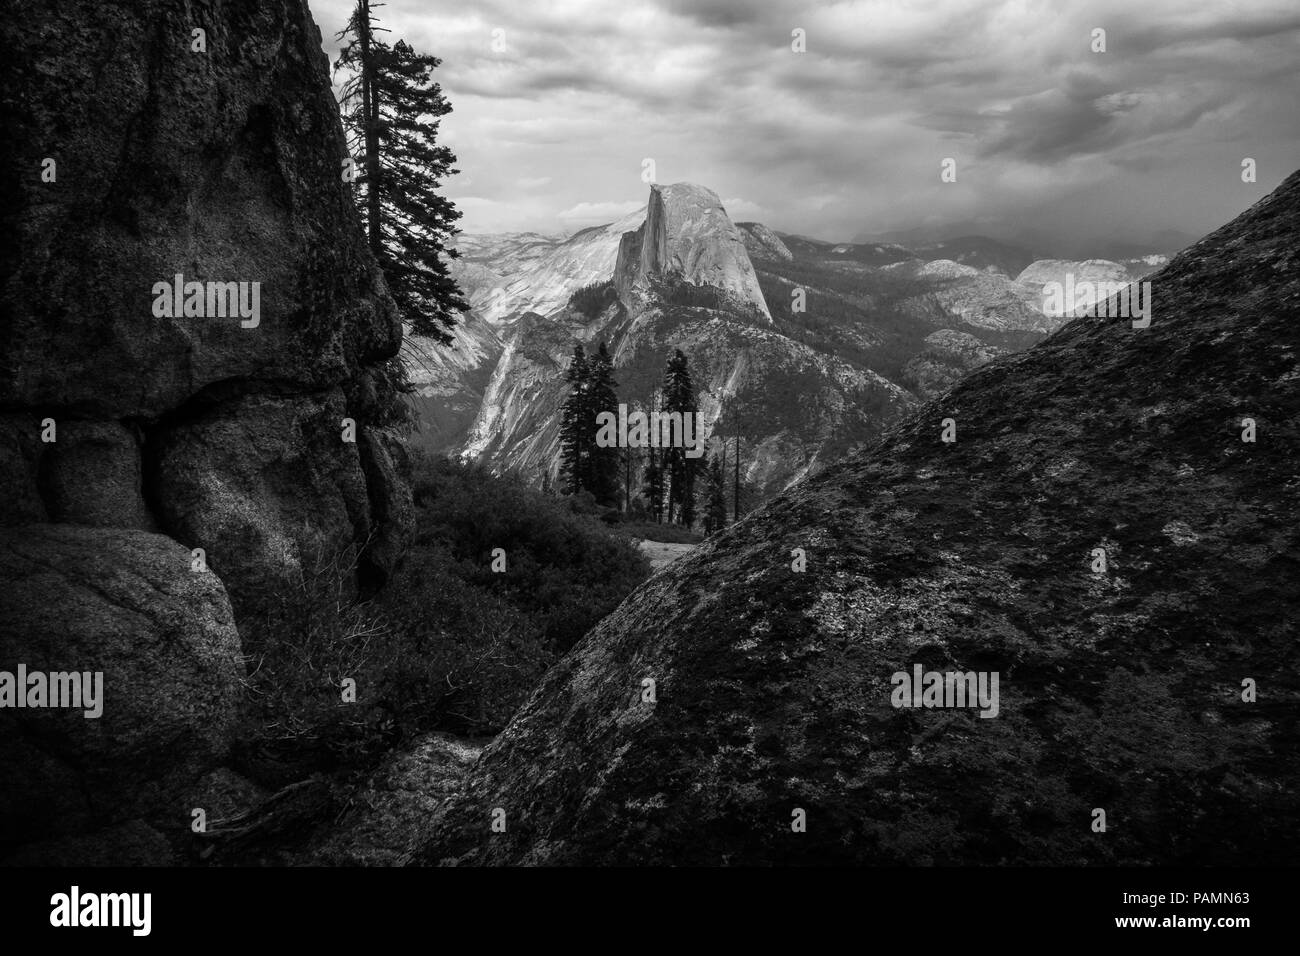 Thunderstorms over Half Dome and Yosemite Valley - Black and White Taken from Wawona (Glacier Point Road) - Yosemite National Park Stock Photo